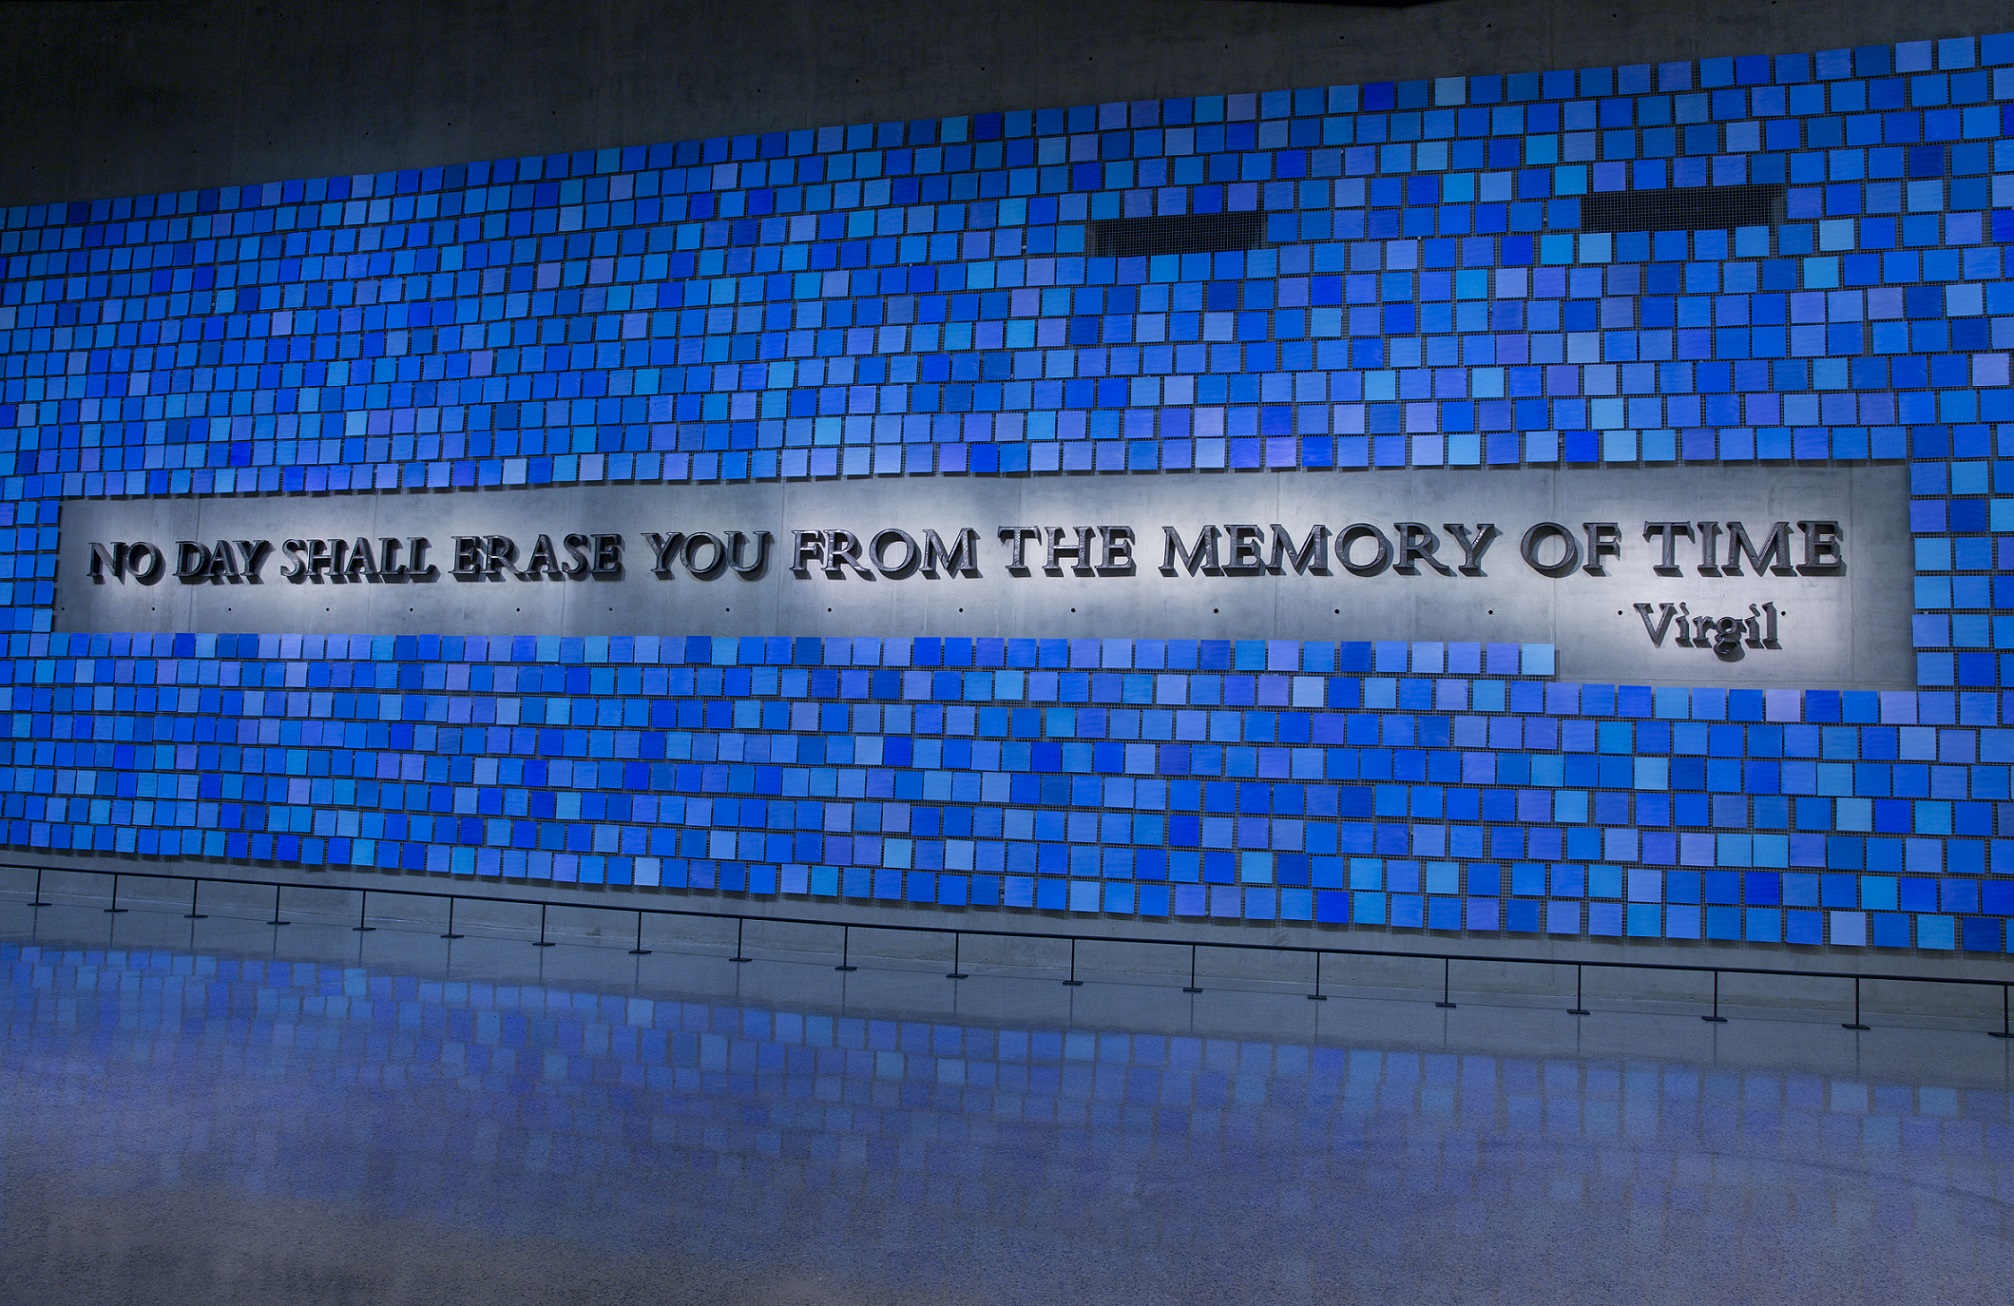 A large plaque in Memorial Hall reads, “No day shall erase you from the memory of time.” The quote from Virgil’s epic poem The Aeneid is surrounded by 2,983 individual blue tiles that comprise "Trying to Remember the Color of the Sky on That September Morning,” an installation by Spencer Finch. Every square is a unique shade of blue, reflecting the artist's attempt to remember the color of the sky on the morning of 9/11 and commemorating the victims of September 11, 2001 and February 26, 1993. 